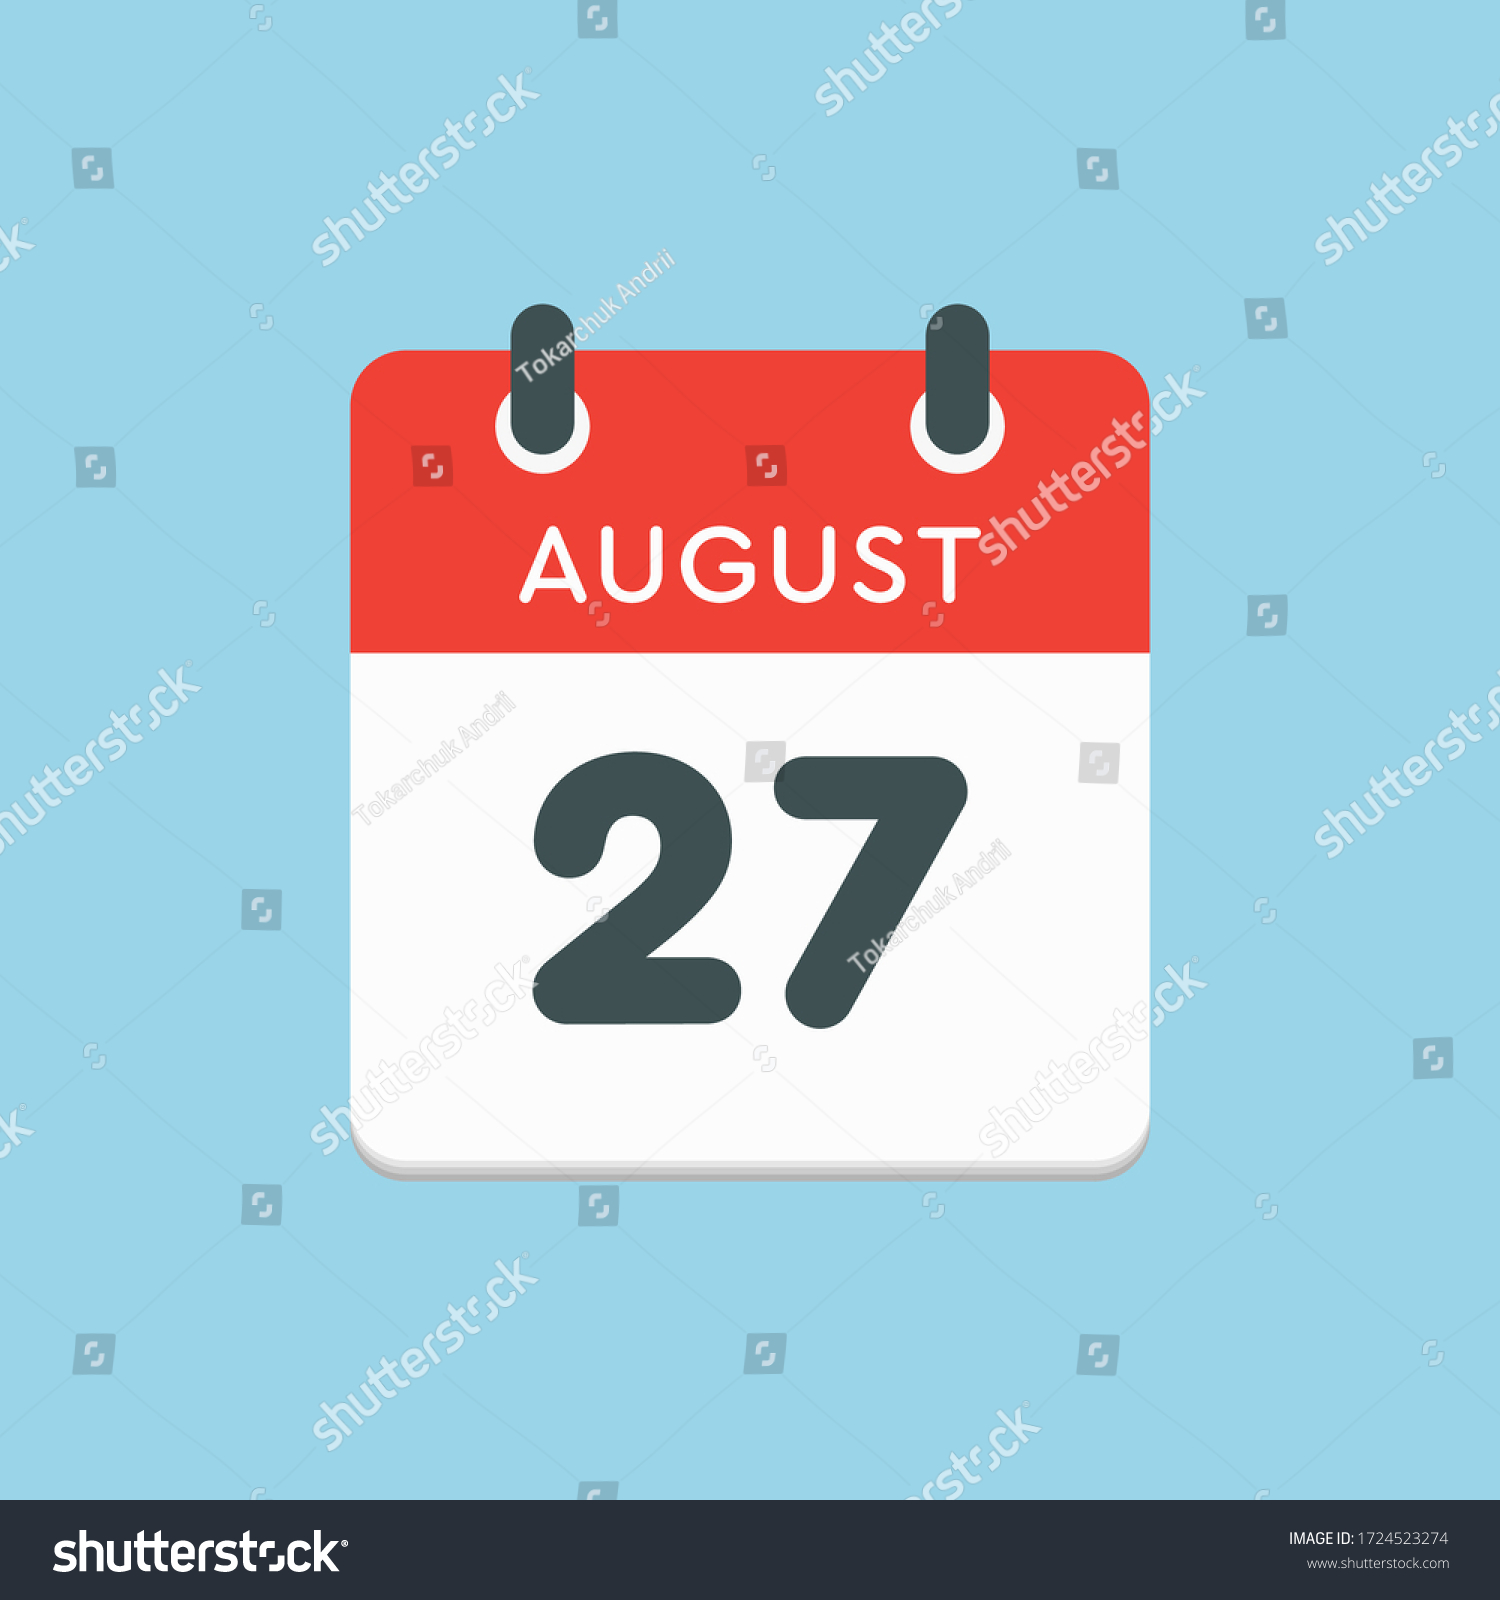 SVG of Vector icon calendar day - 27 August. Days of the year. Vector illustration flat style. Date day of month Sunday, Monday, Tuesday, Wednesday, Thursday, Friday, Saturday. Summer holidays spring August svg